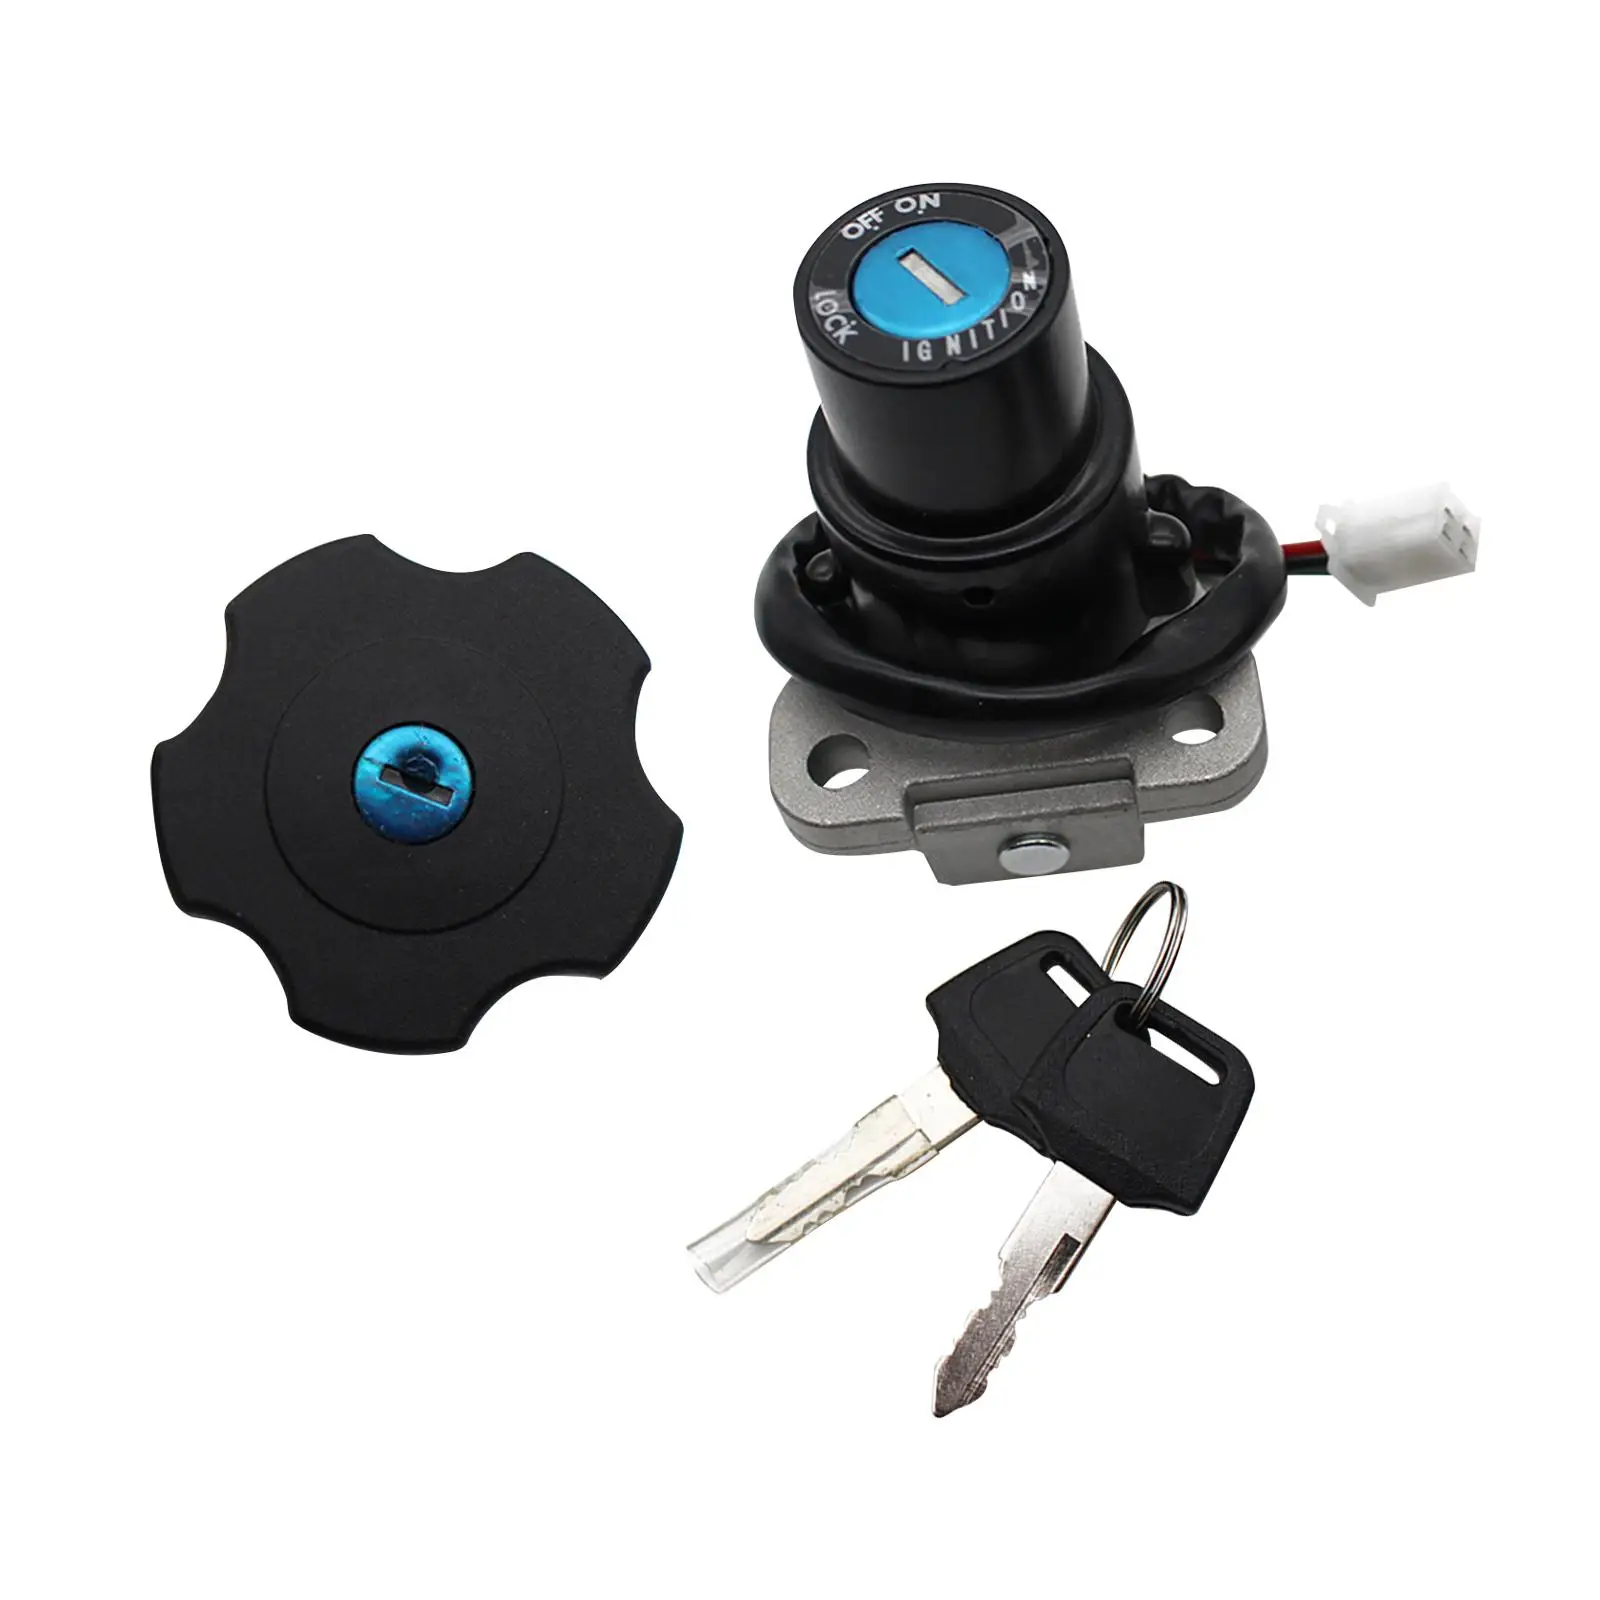 Motorcycle Lgnition Start Switch Fuel Seat lock 0 0R 1991-1994 Replaces ,Professional Accessory